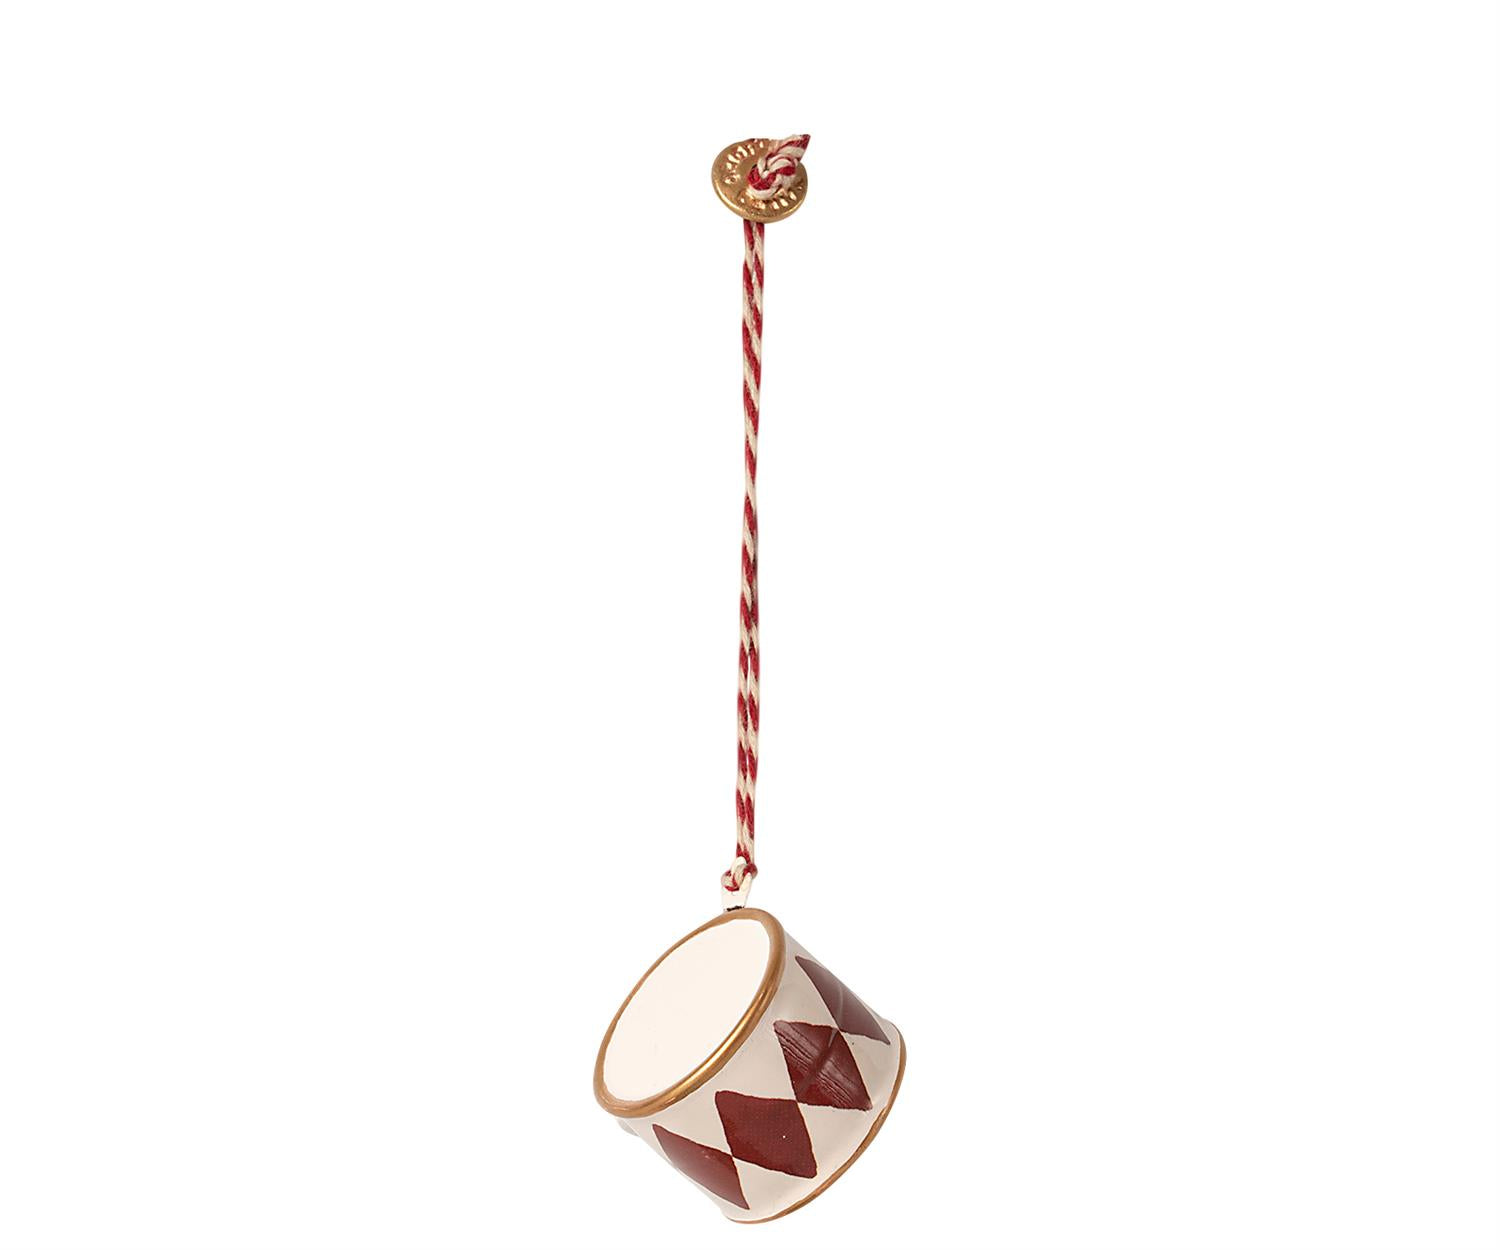 MAILEG Metal ornament, Small drum - Red